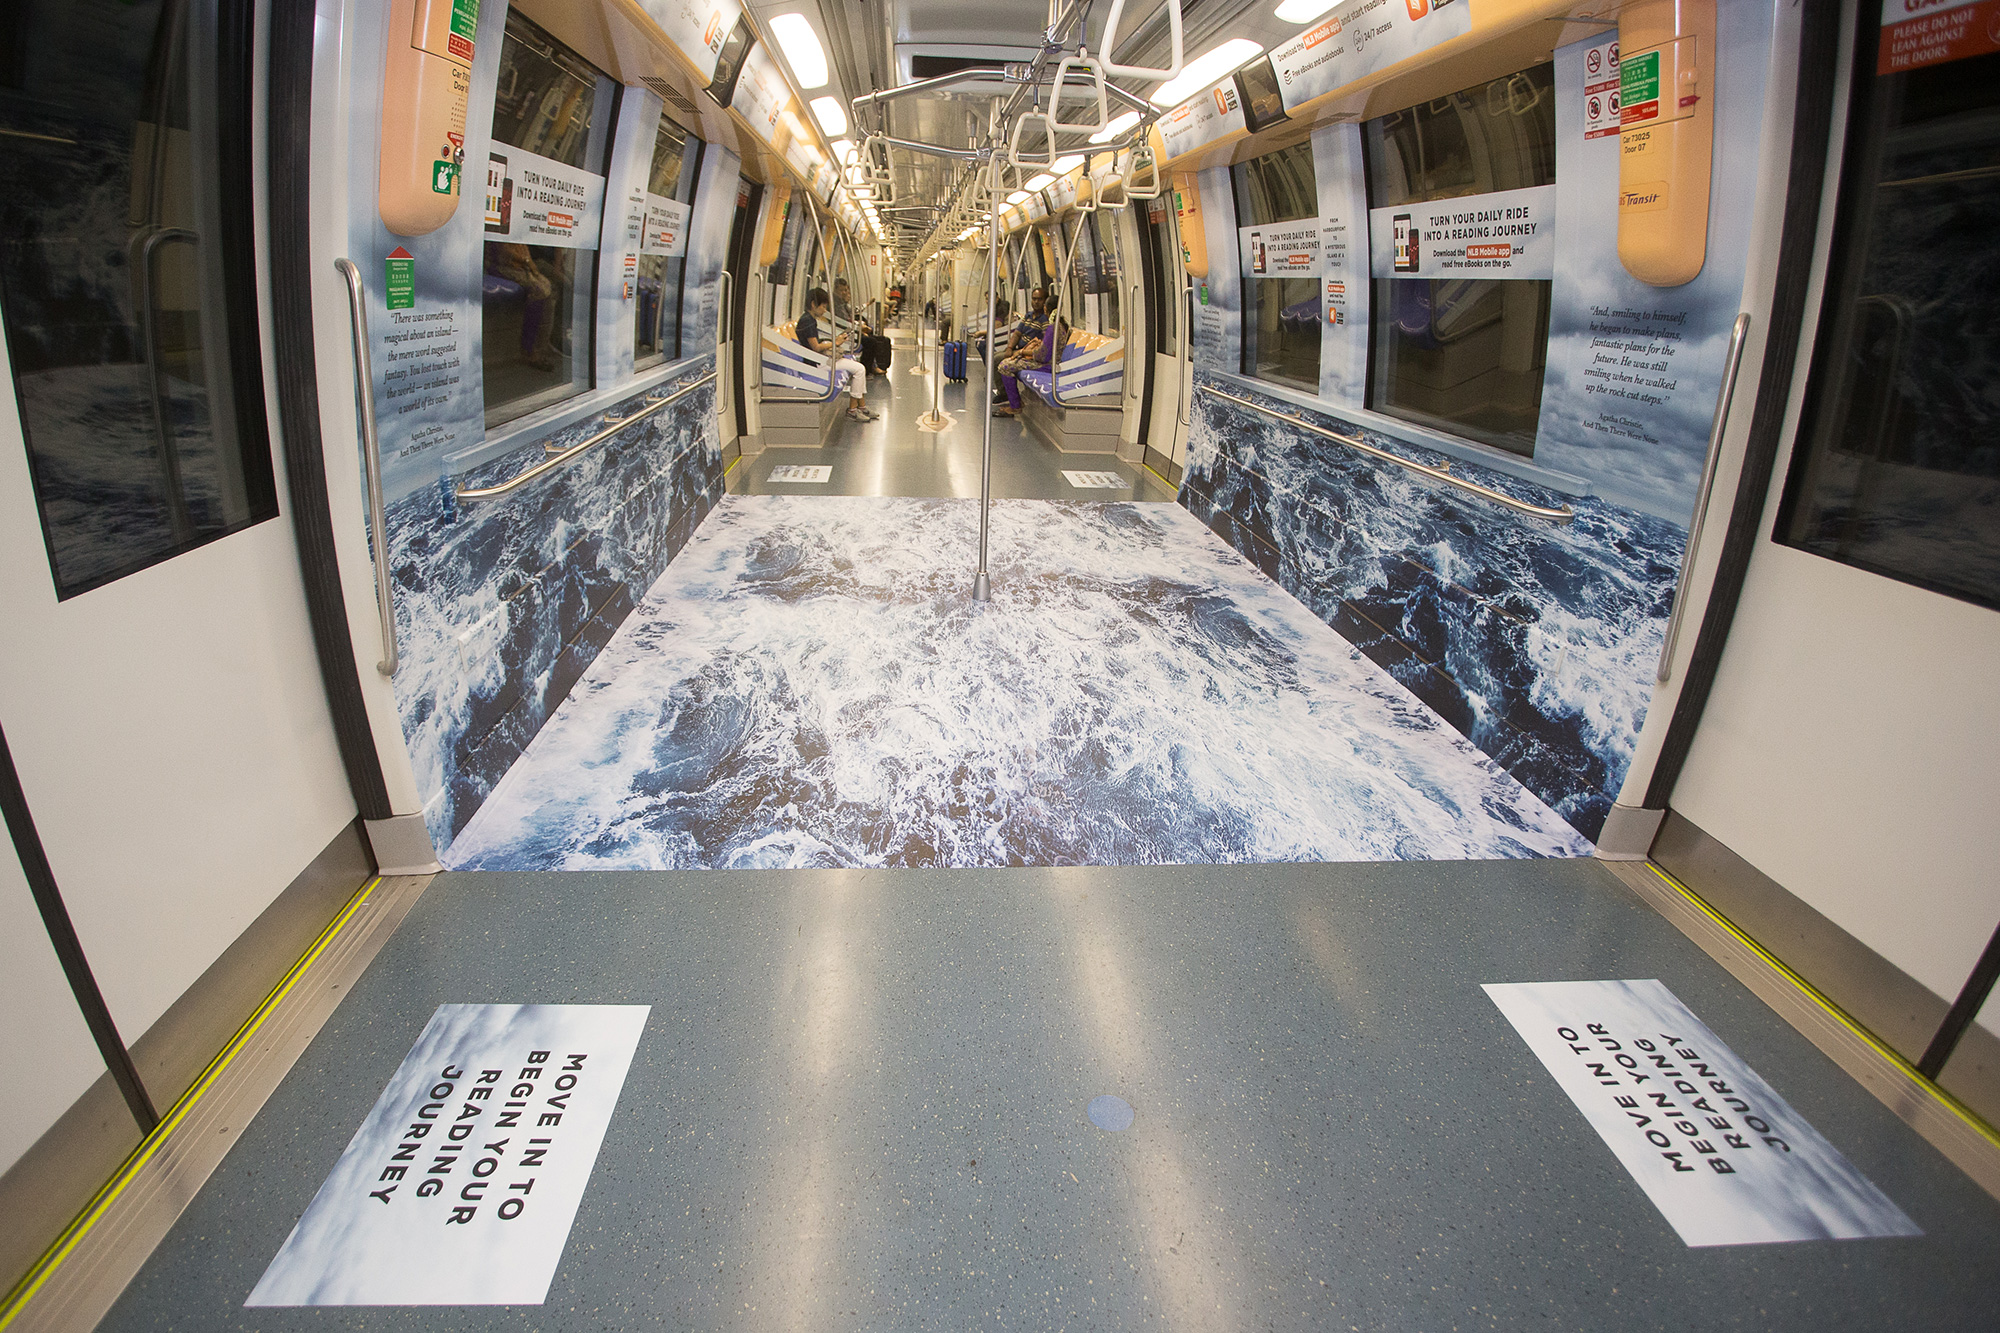 A mystery-themed standing cabin in the Northeast Line (NEL) train inspired by Agatha Christie’s “And then there were none”. This is part of Reading on the Move, an NLB initiative aimed at reaching out to working adults to encourage them to read on the go.